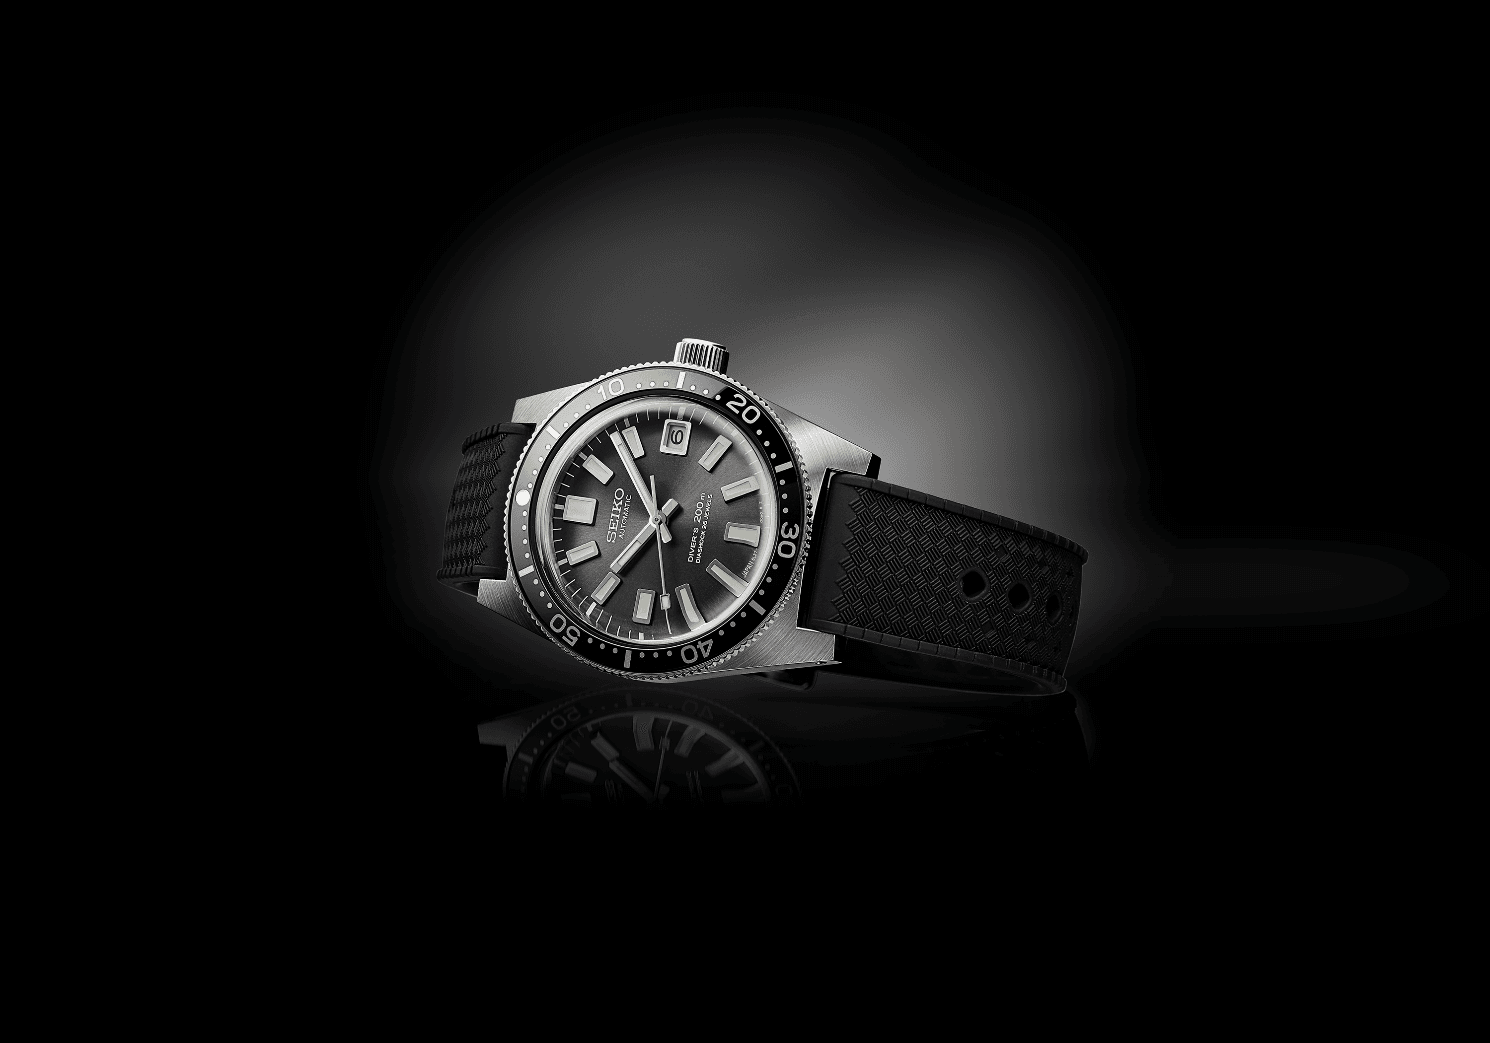 The watch is powered by the new Caliber 6L37.